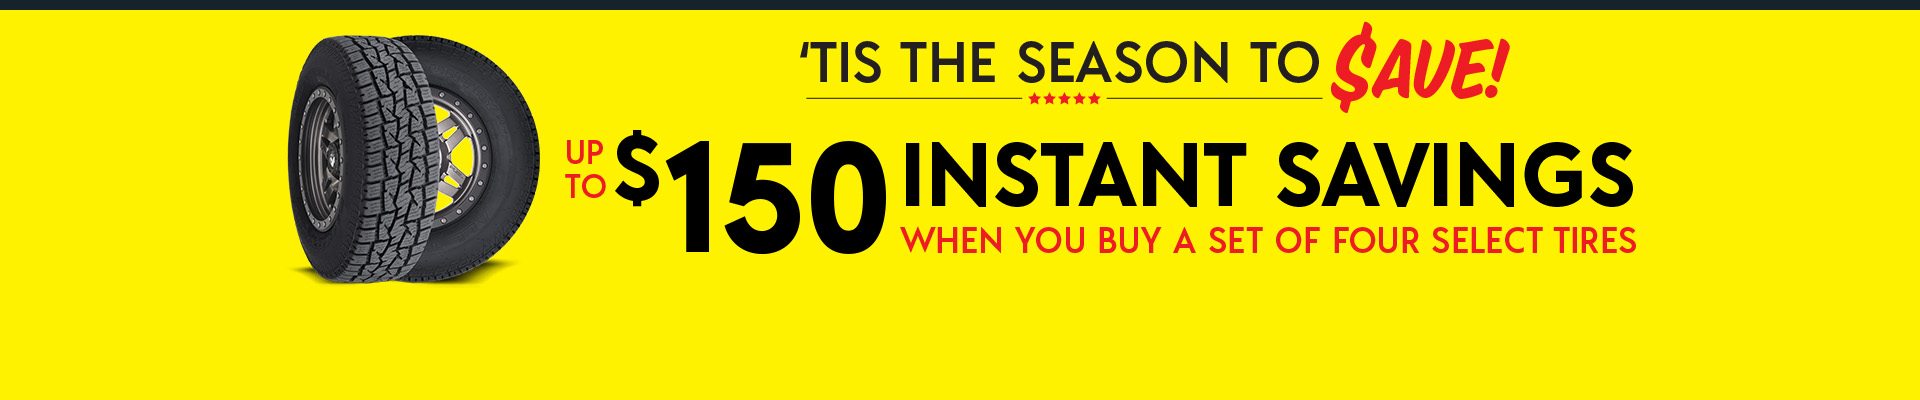 Up to $150 in Instant Savings